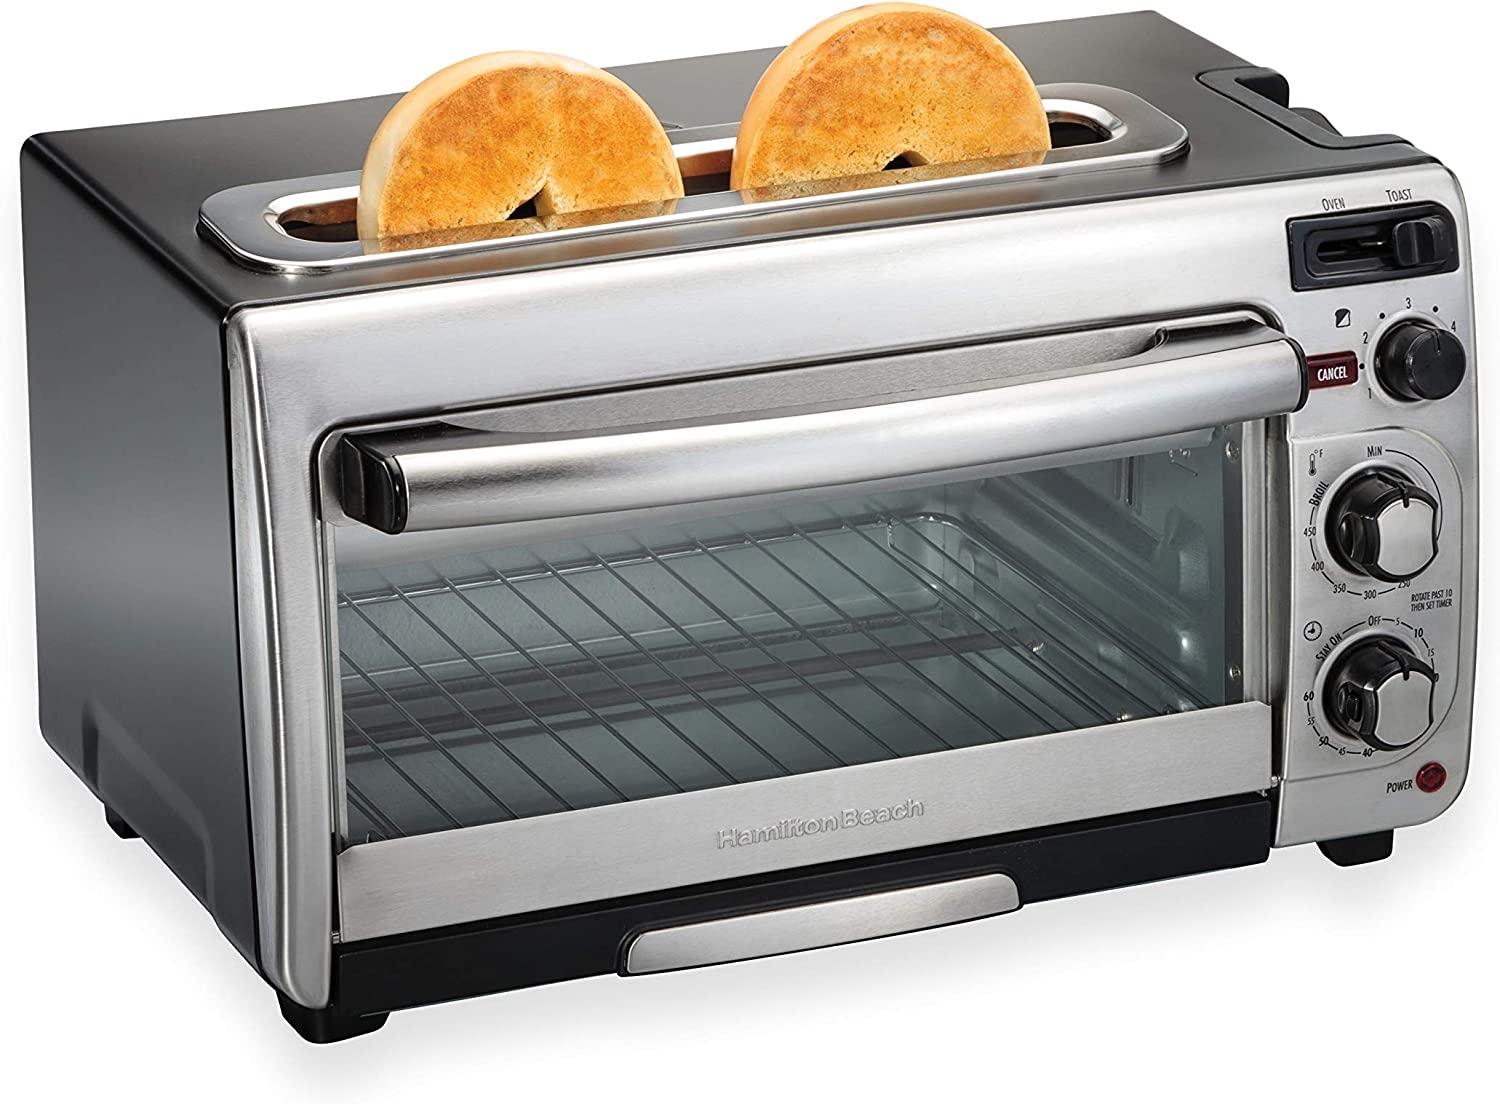 Hamilton Beach 2-in-1 Countertop Oven and Long Slot Toaster, Stainless Steel, 60 Minute Timer and Automatic Shut Off (31156)